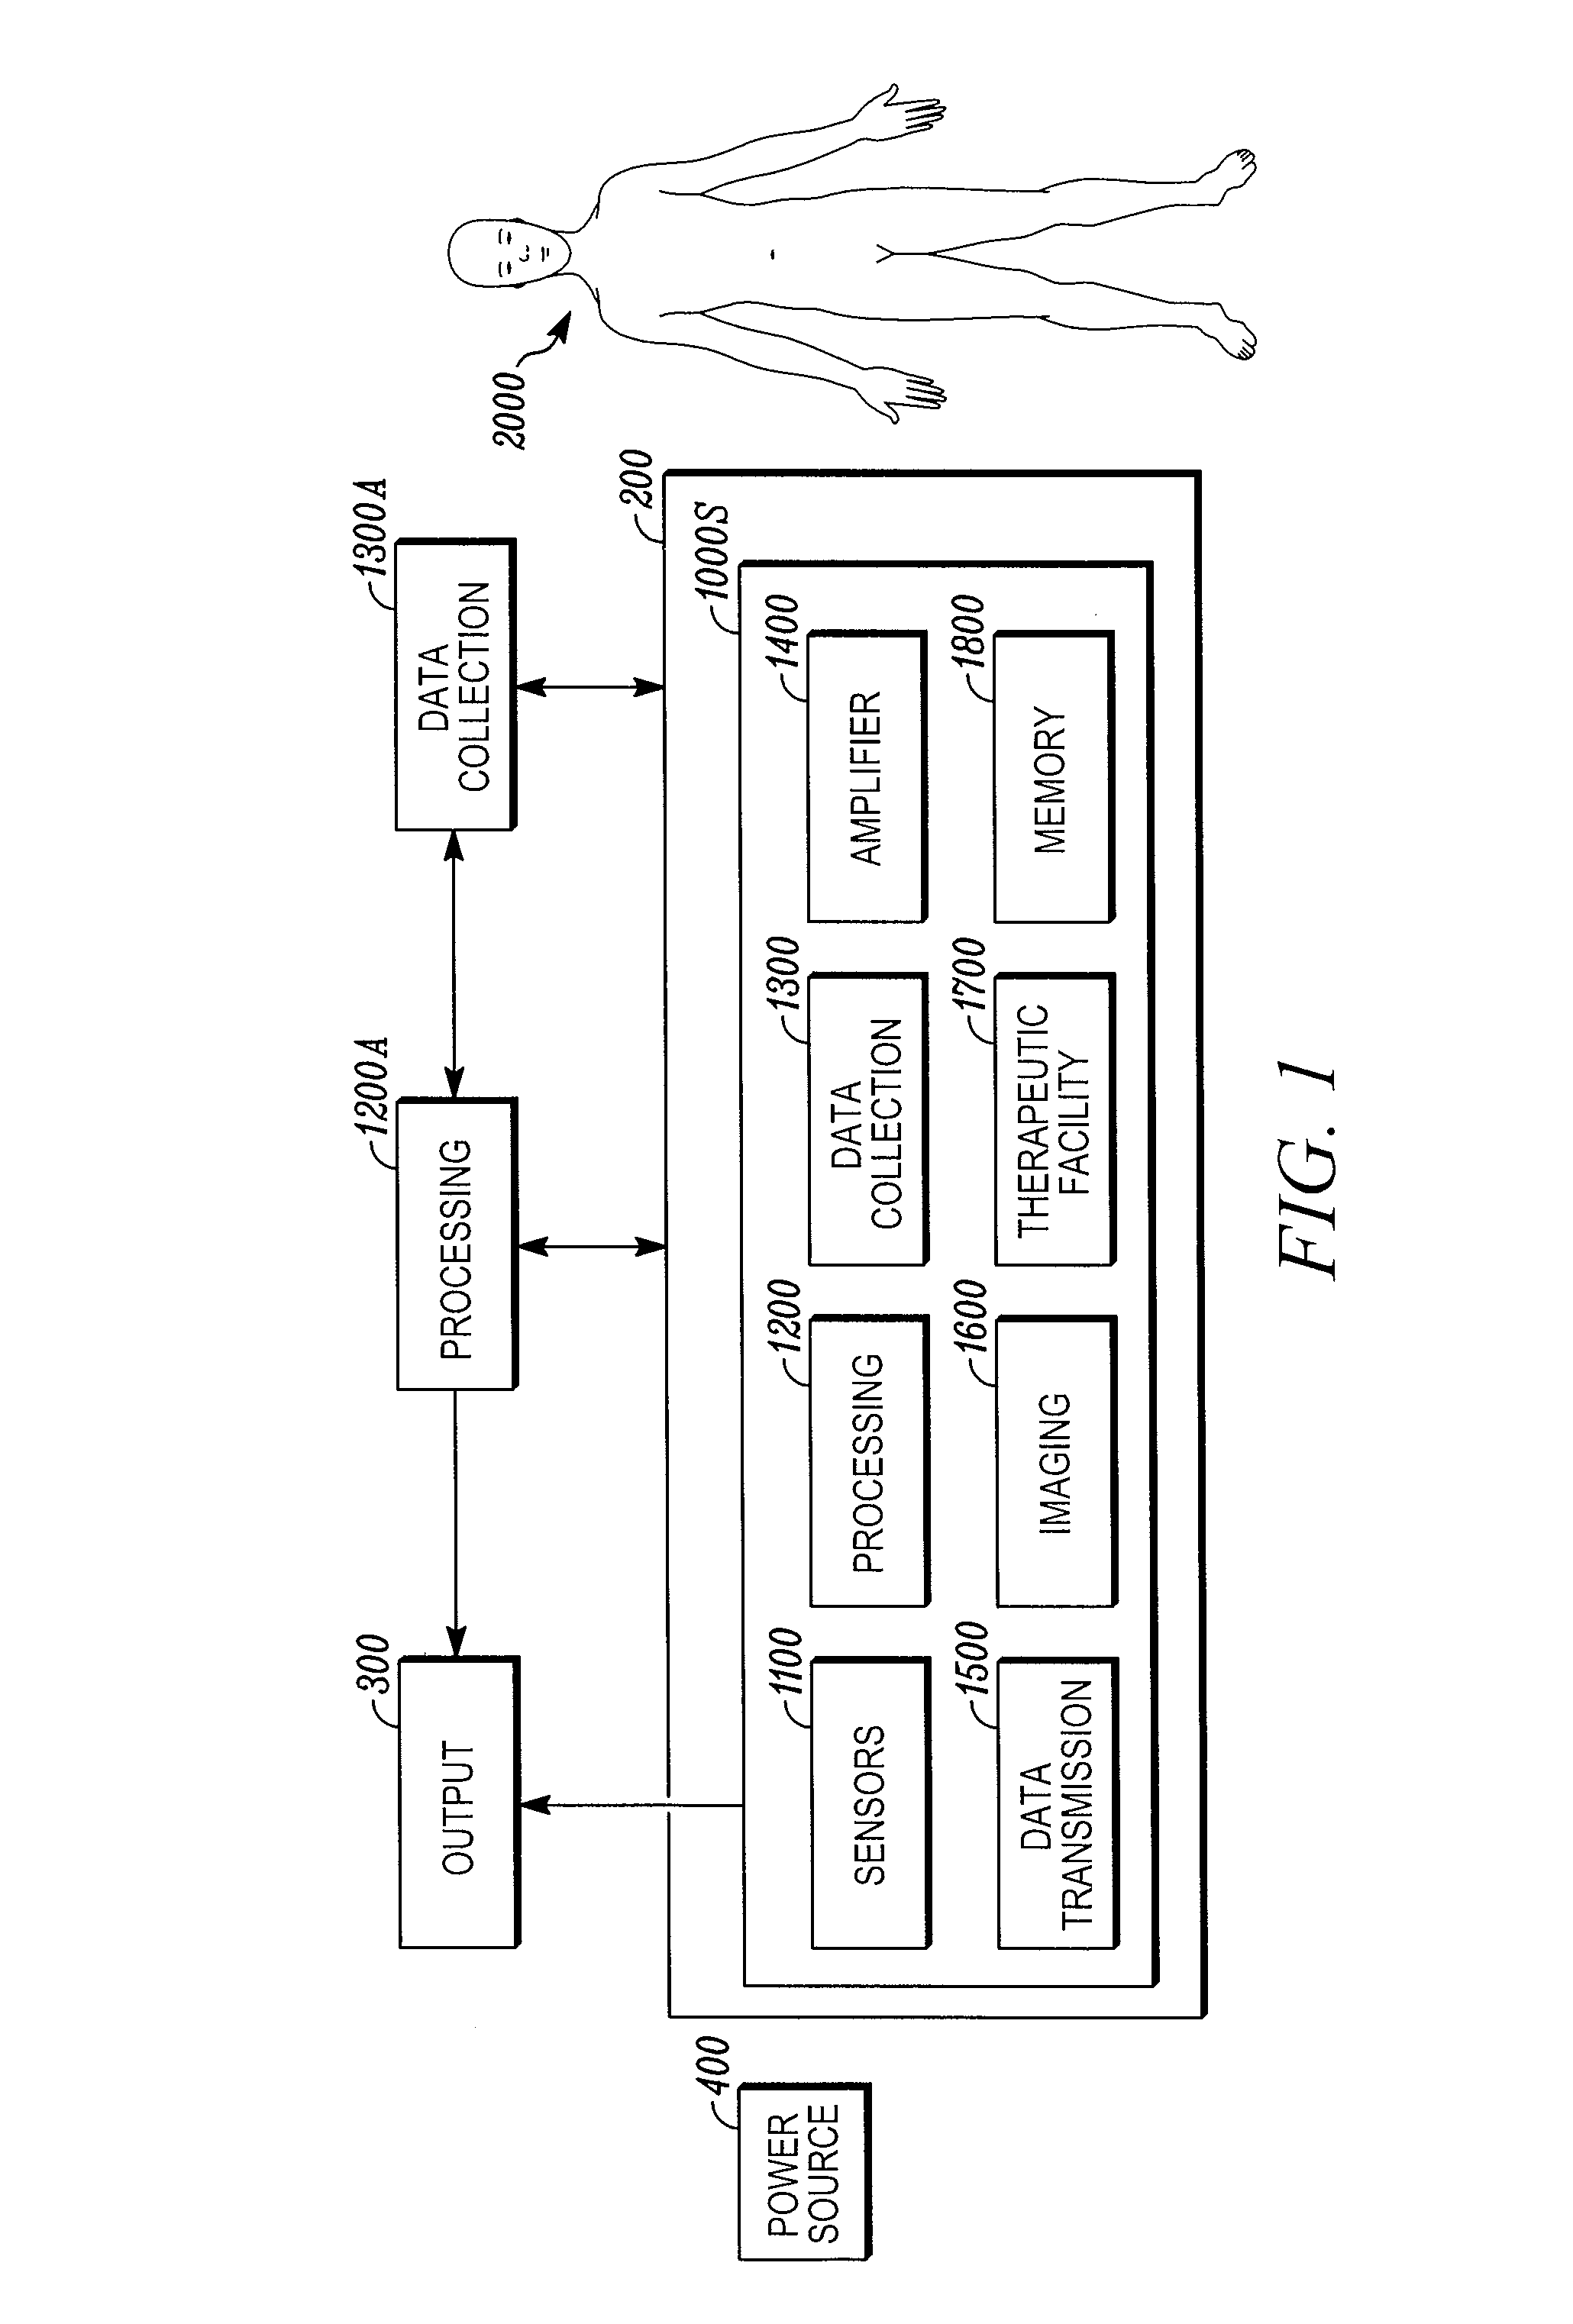 Systems, methods, and devices having stretchable integrated circuitry for sensing and delivering therapy